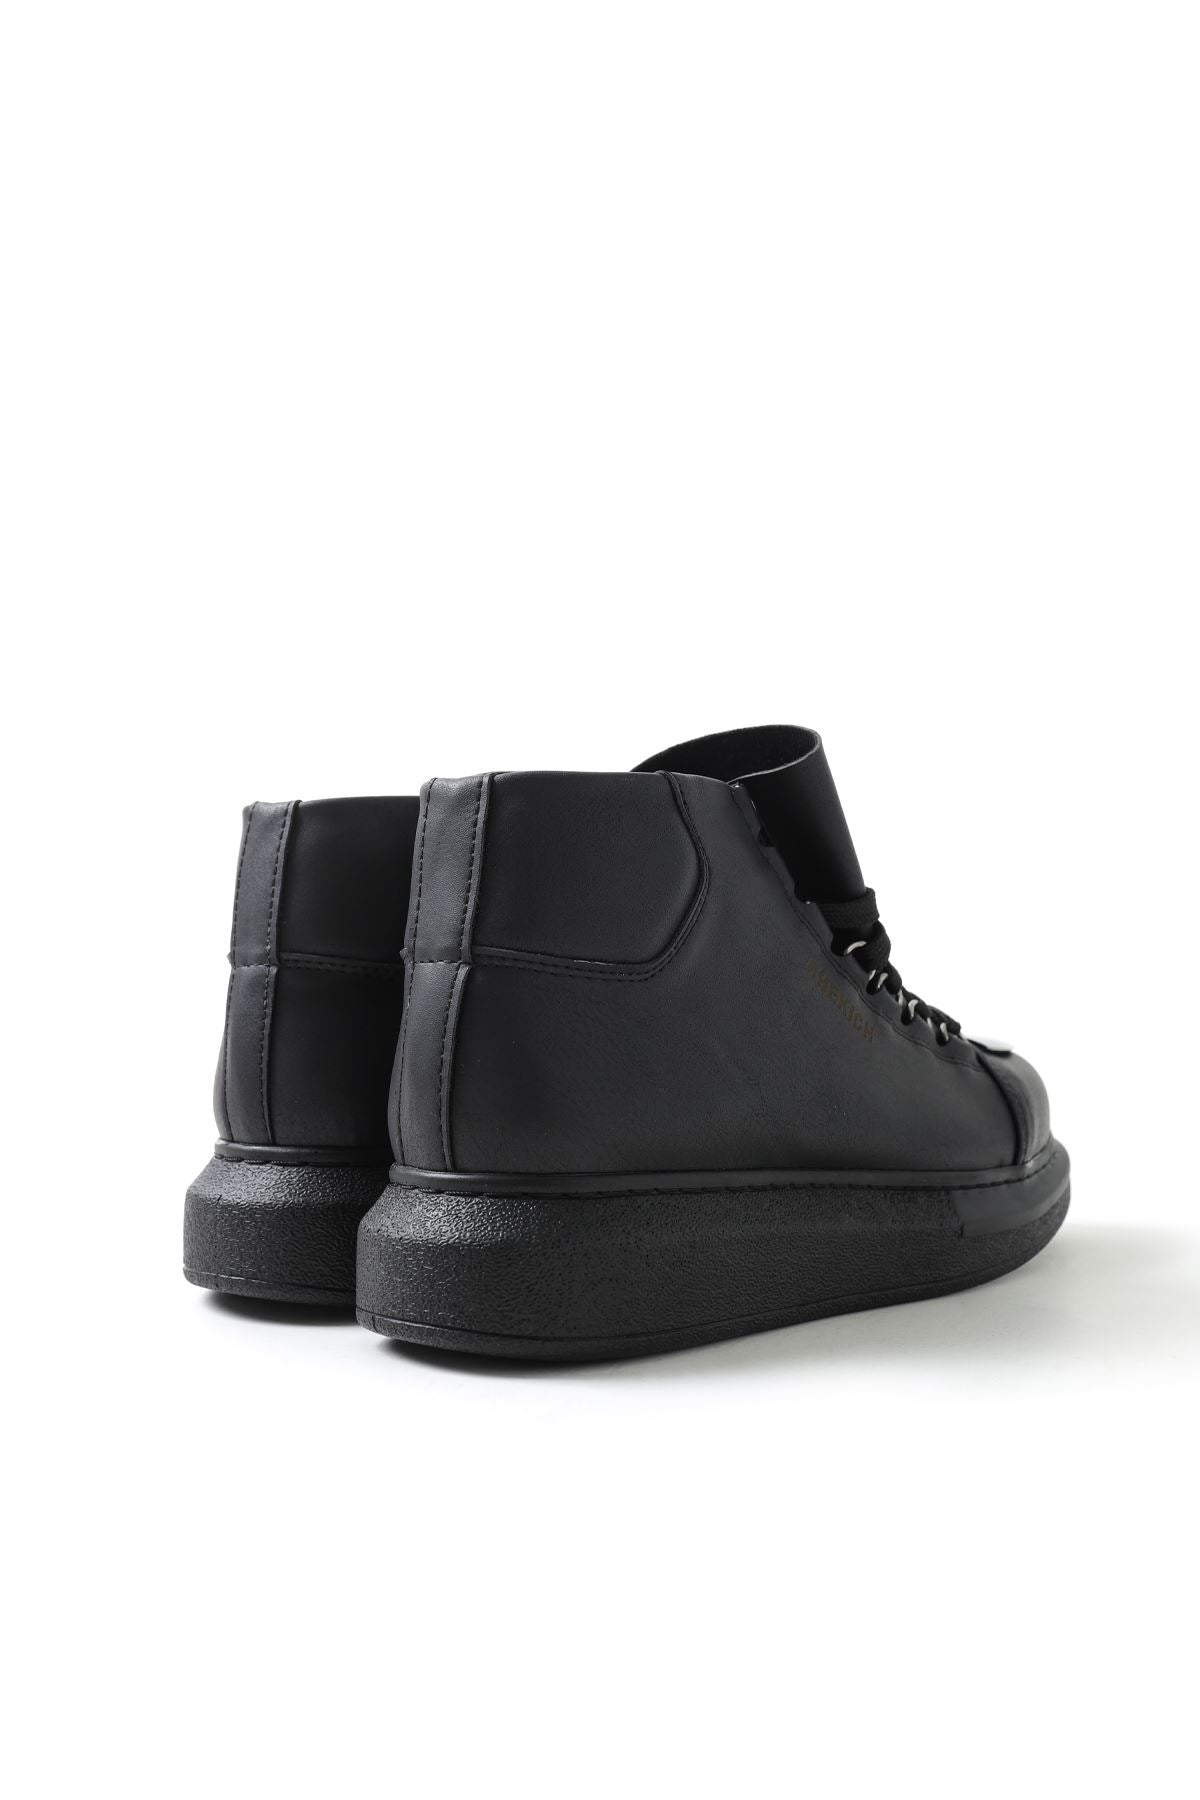 CH267 ST Men's Boots BLACK - STREETMODE ™